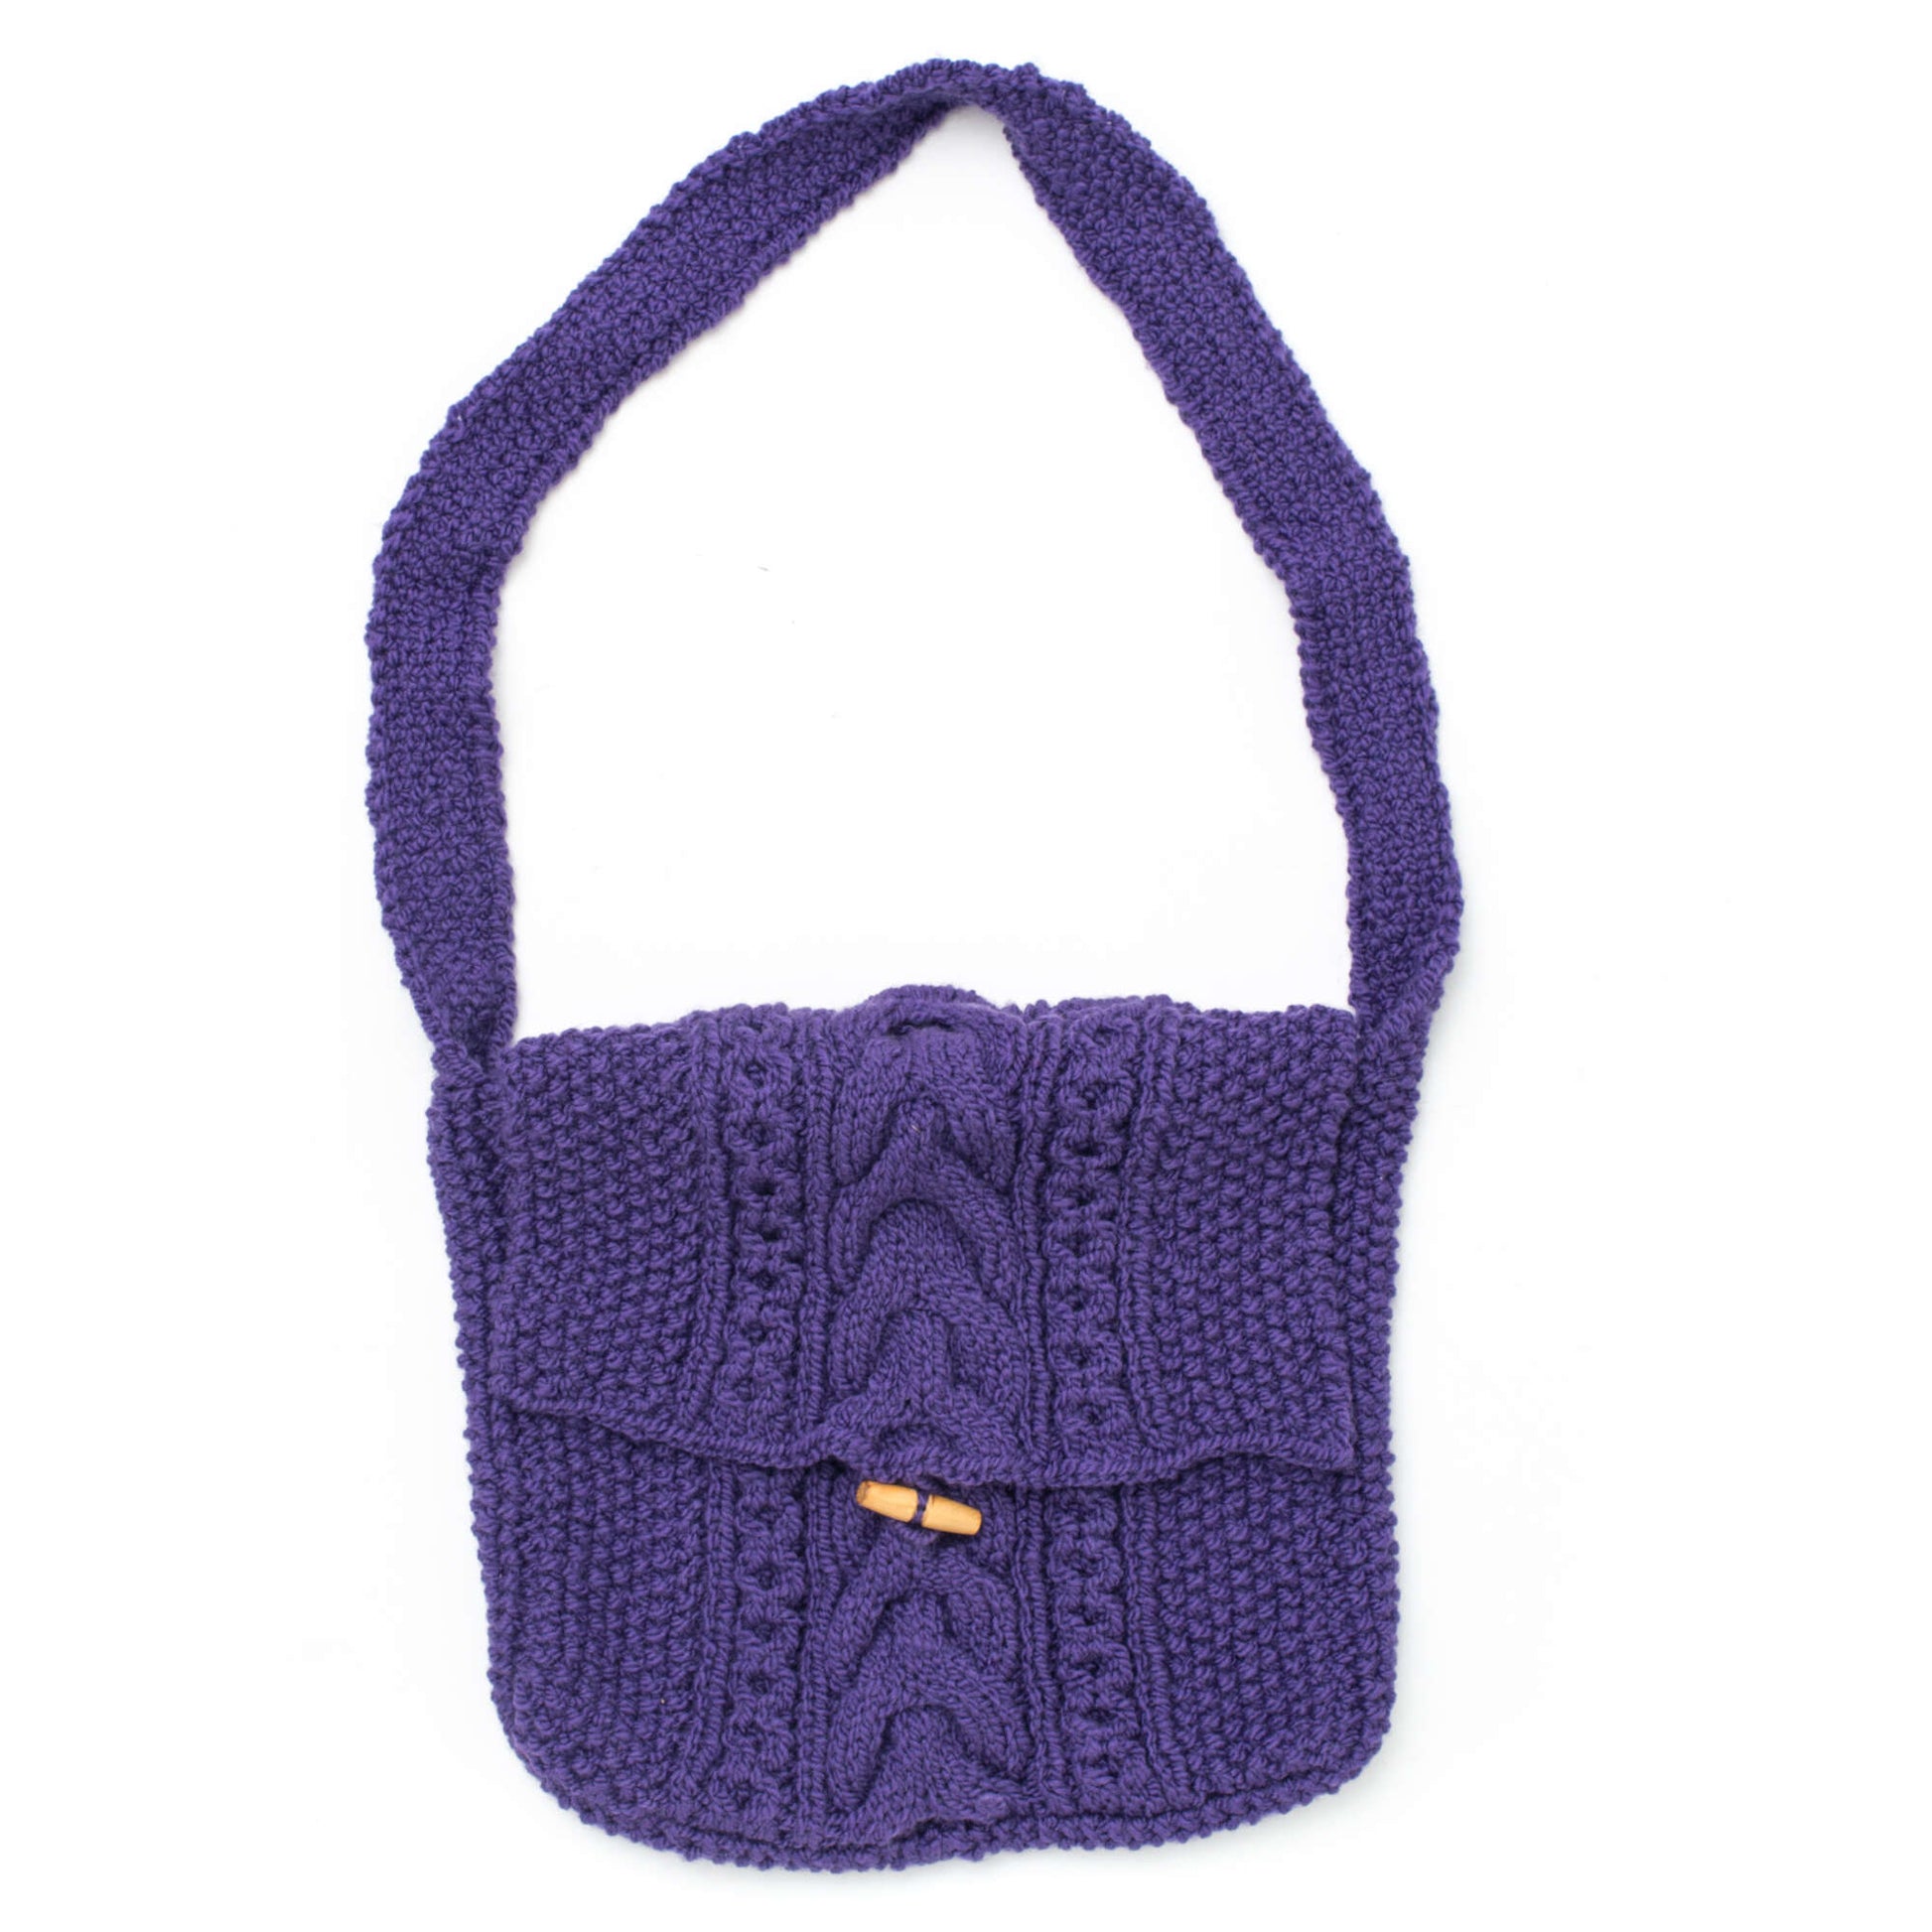 Free Patons Knit Seed Stitch And Cables Bag Pattern